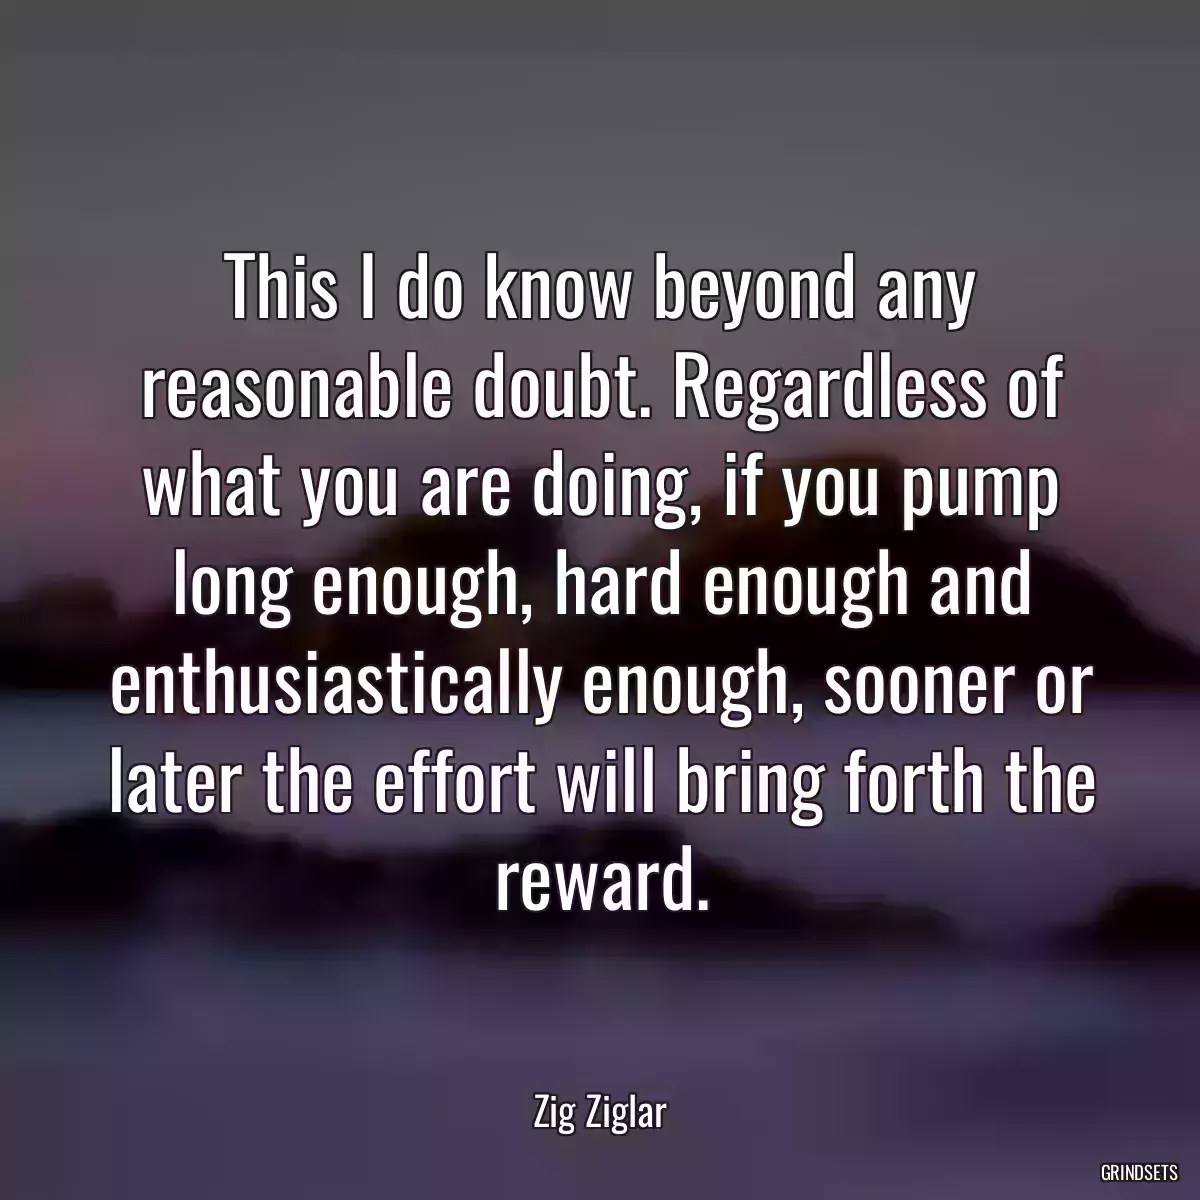 This I do know beyond any reasonable doubt. Regardless of what you are doing, if you pump long enough, hard enough and enthusiastically enough, sooner or later the effort will bring forth the reward.